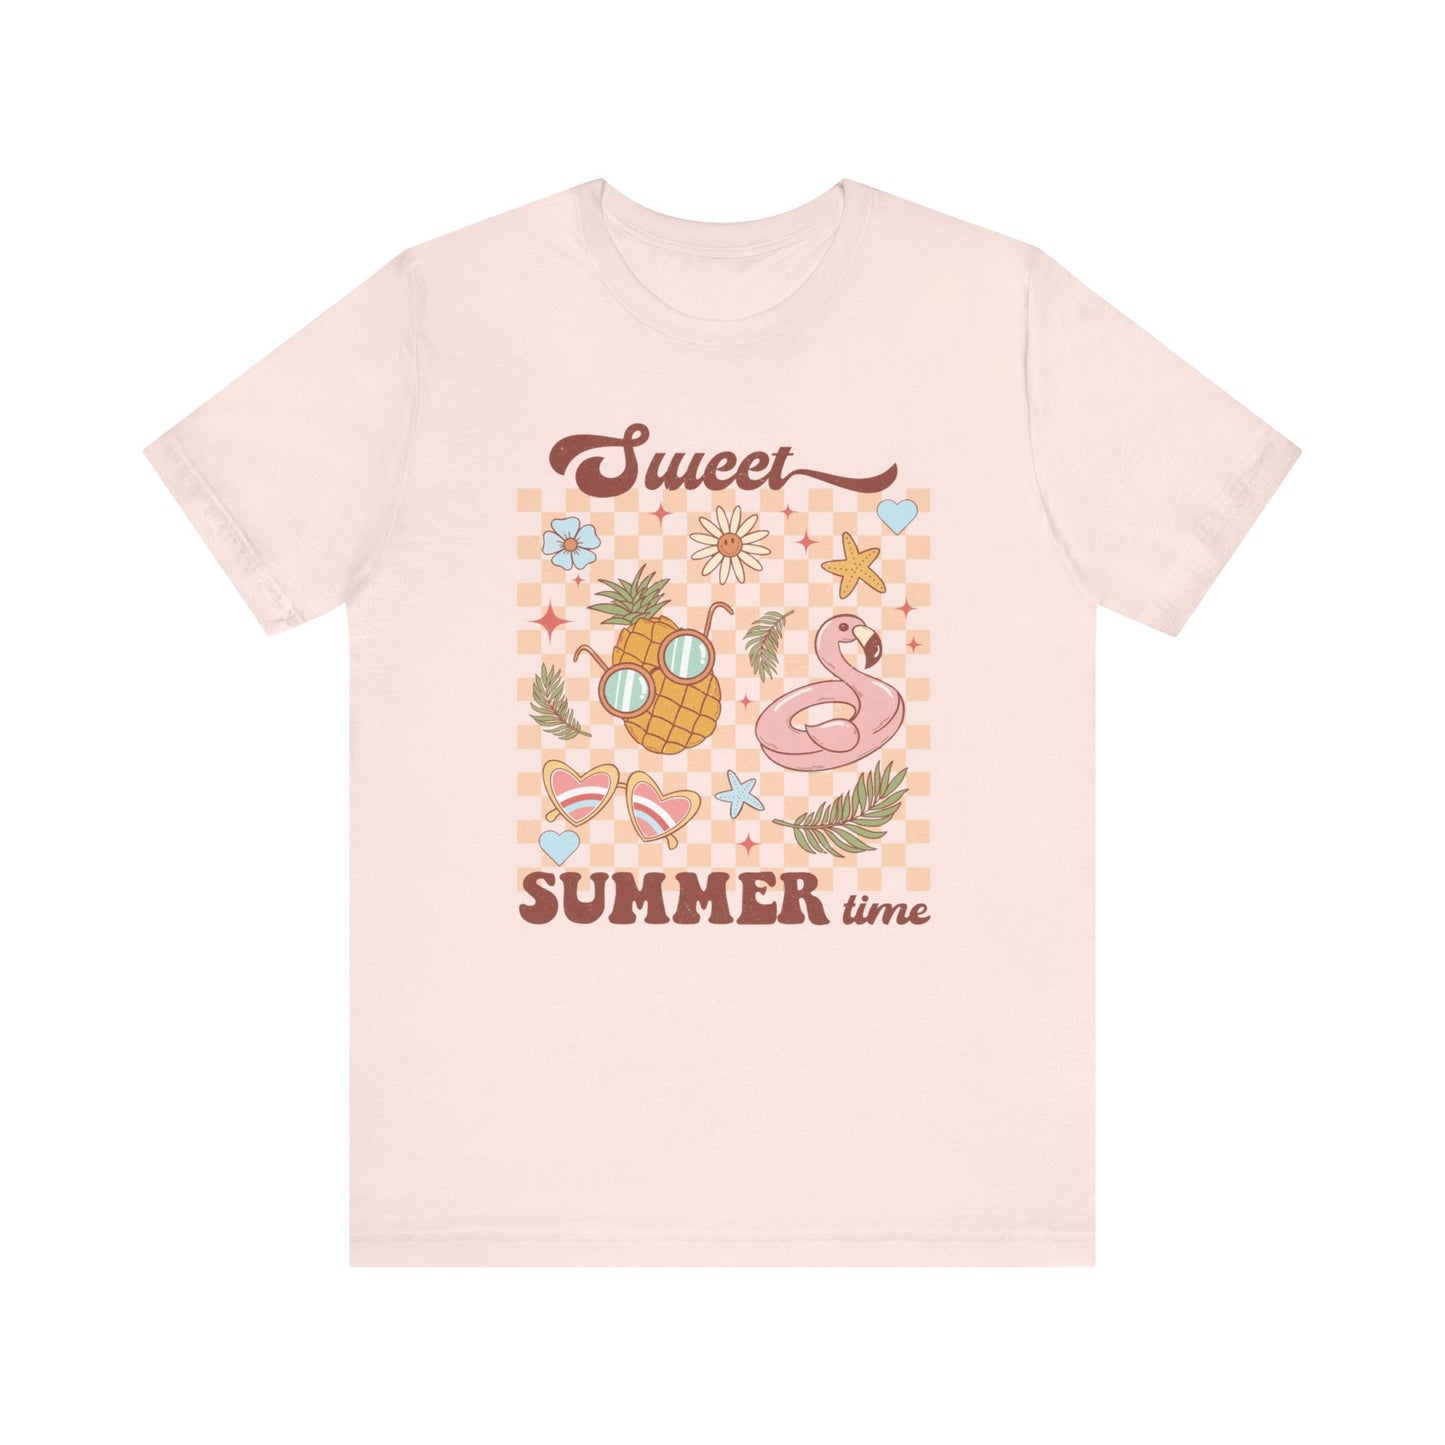 Sweet Summer Time Pineapple and Flamingo Graphic T-Shirt, Vintage Inspired Casual Beach Tee, Unisex Tropical Top